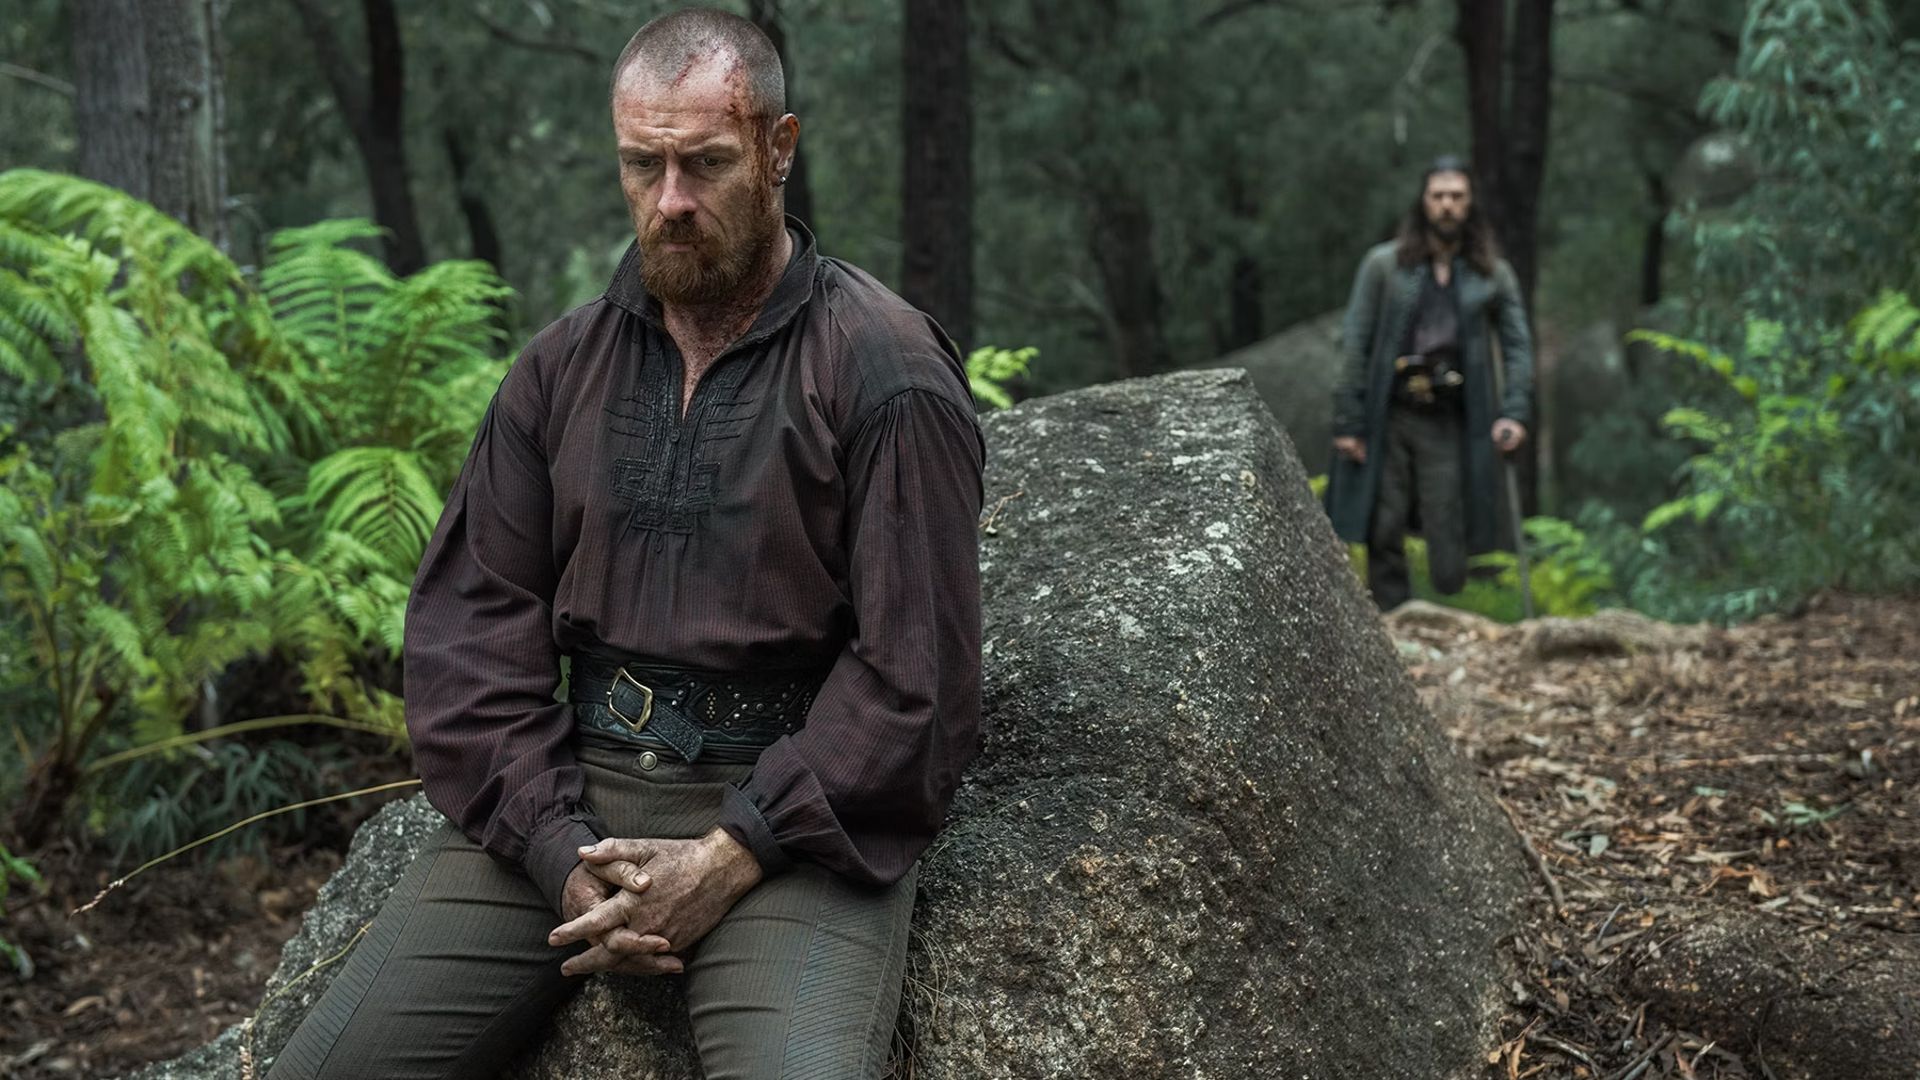 Flint and Silver meet in the woods in Black Sails